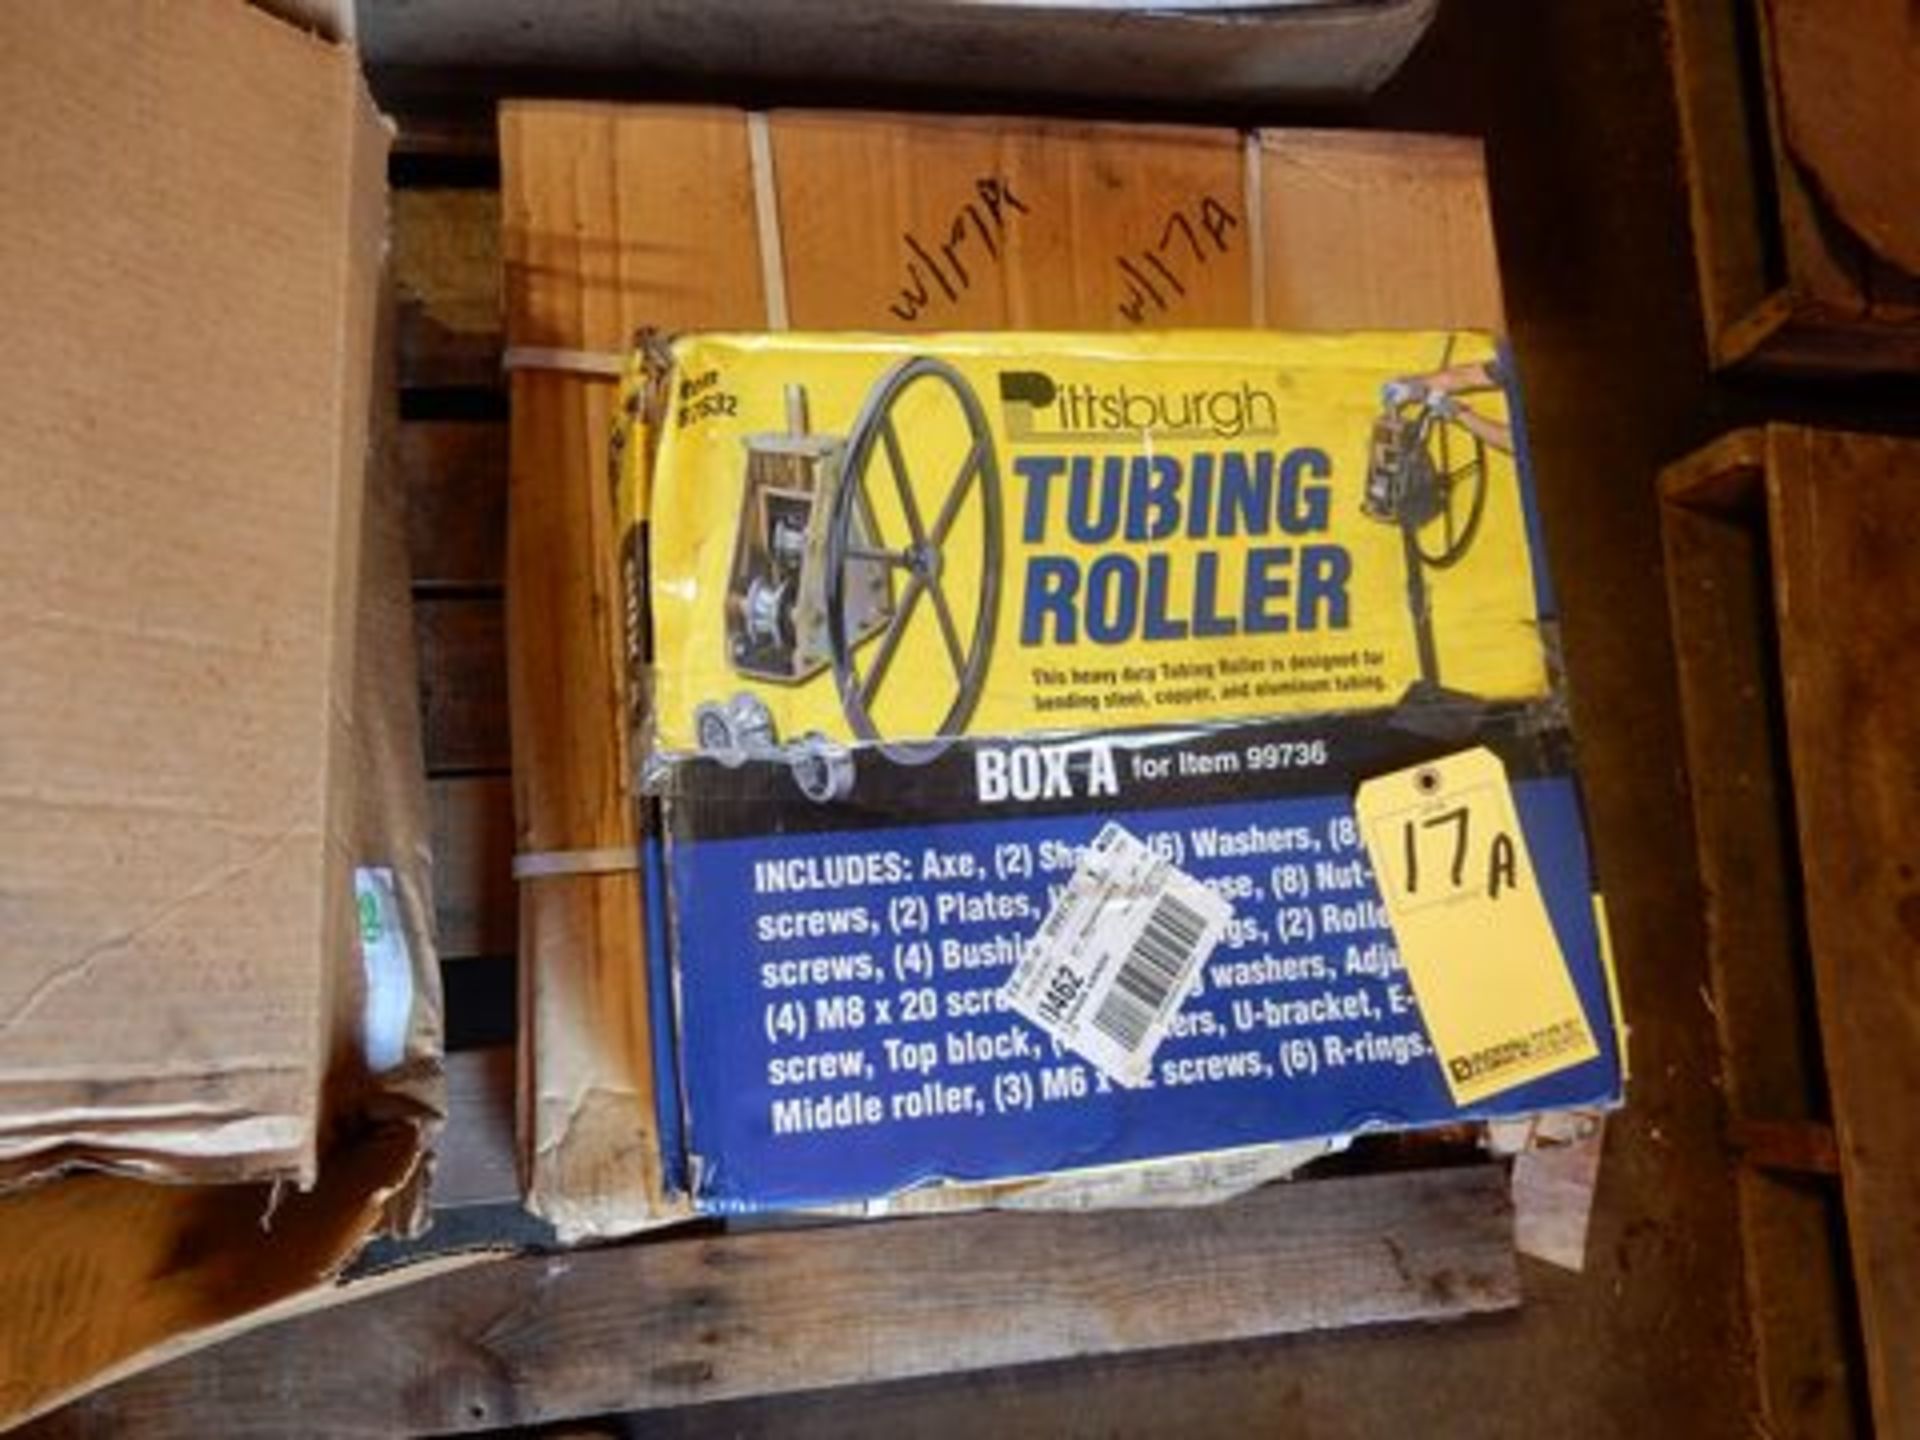 PITTSBURGH TUBING ROLLER, M# 87632 (NEW IN BOX)